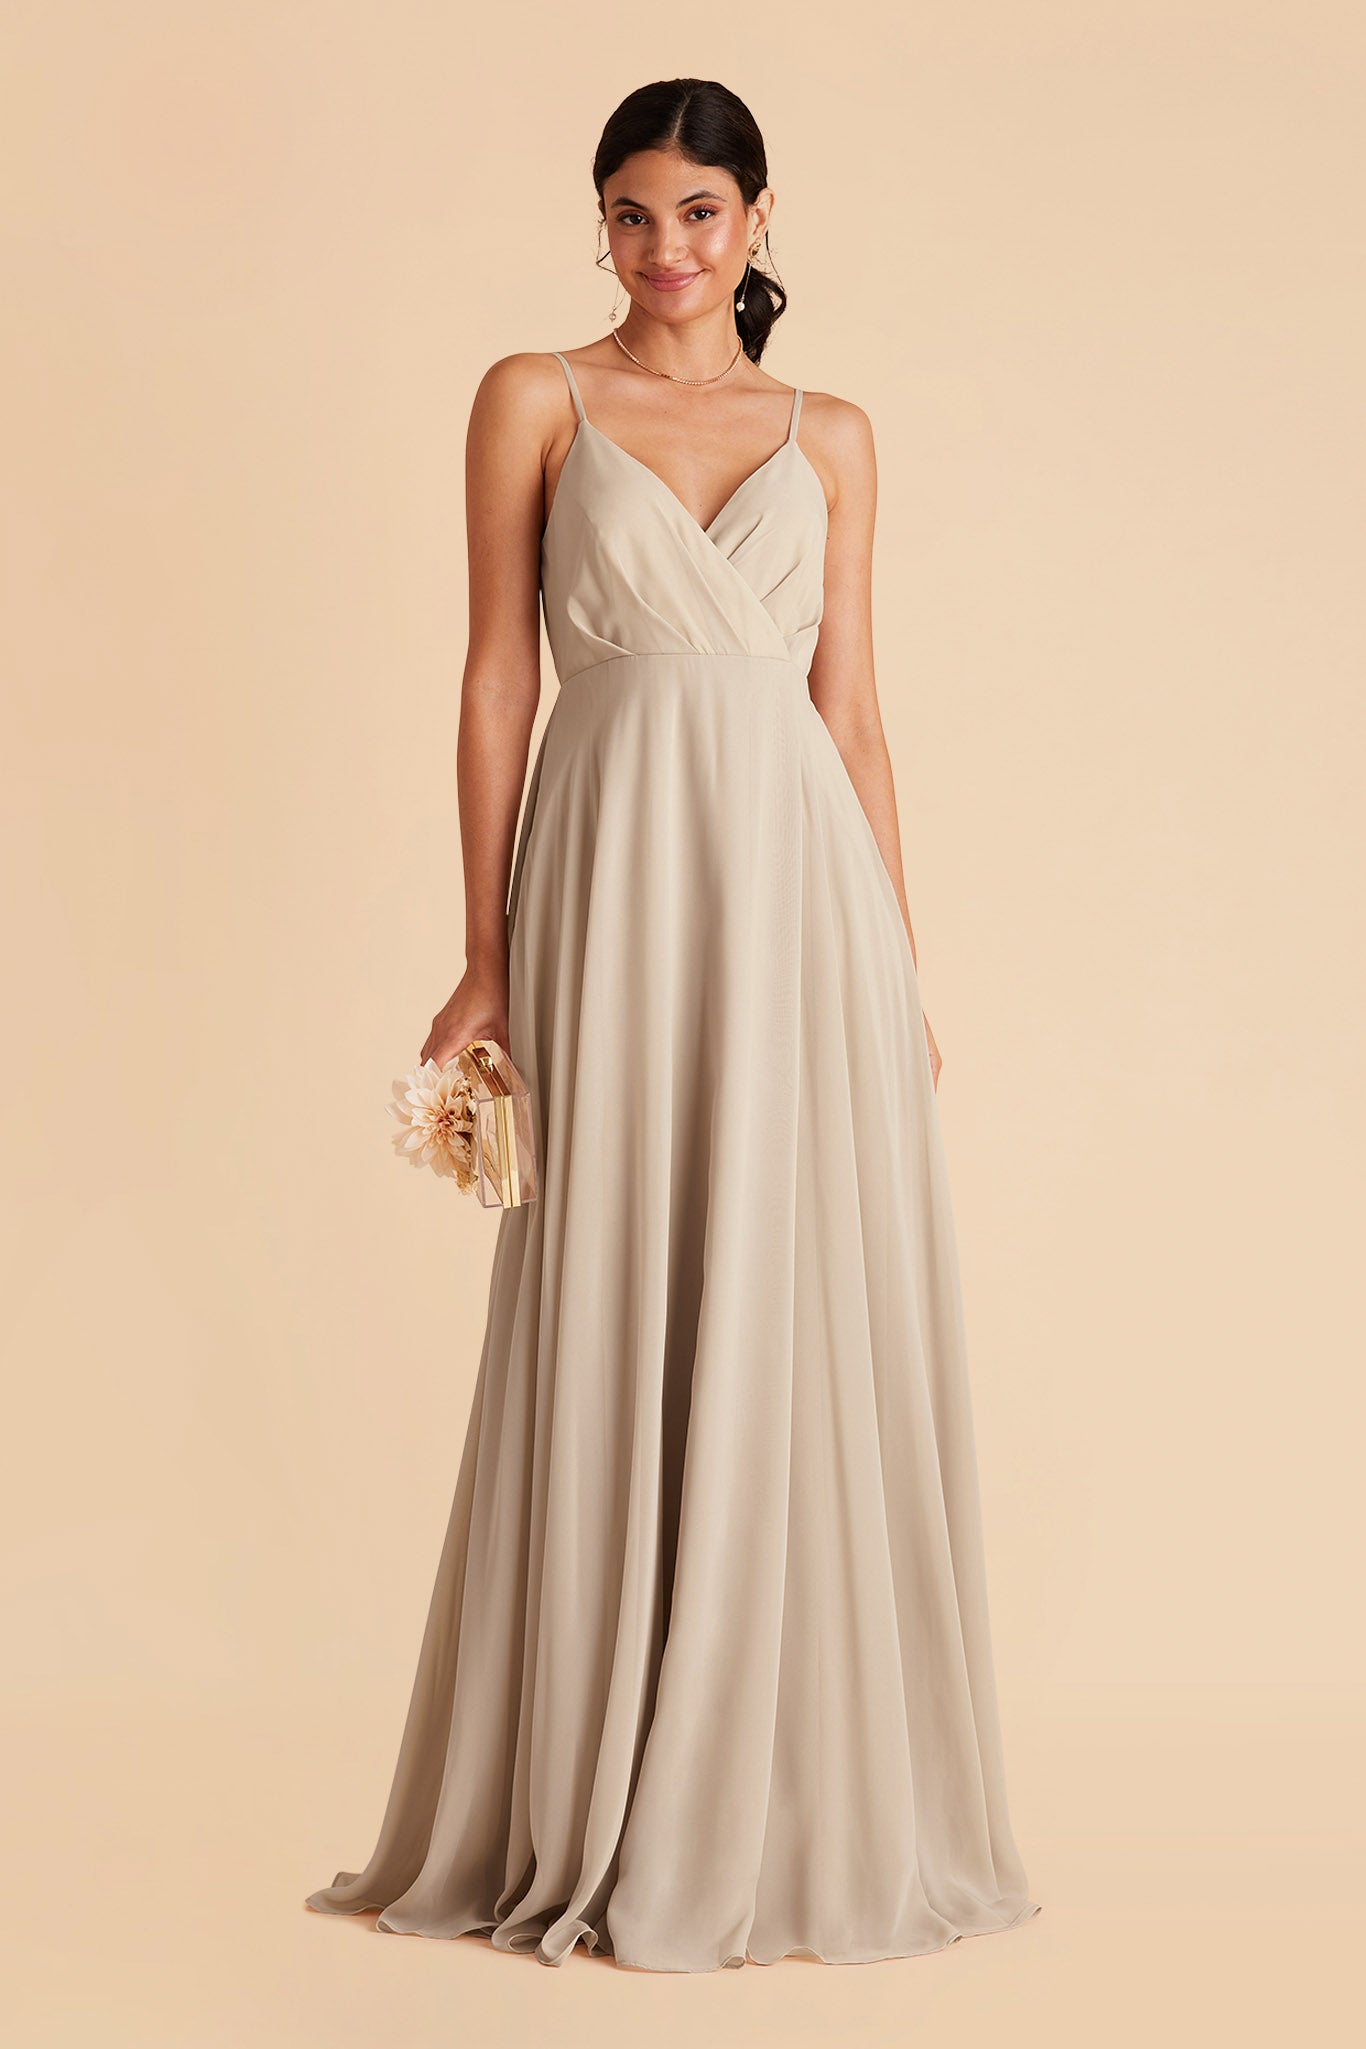 Kaia bridesmaids dress in neutral champagne chiffon by Birdy Grey, front view